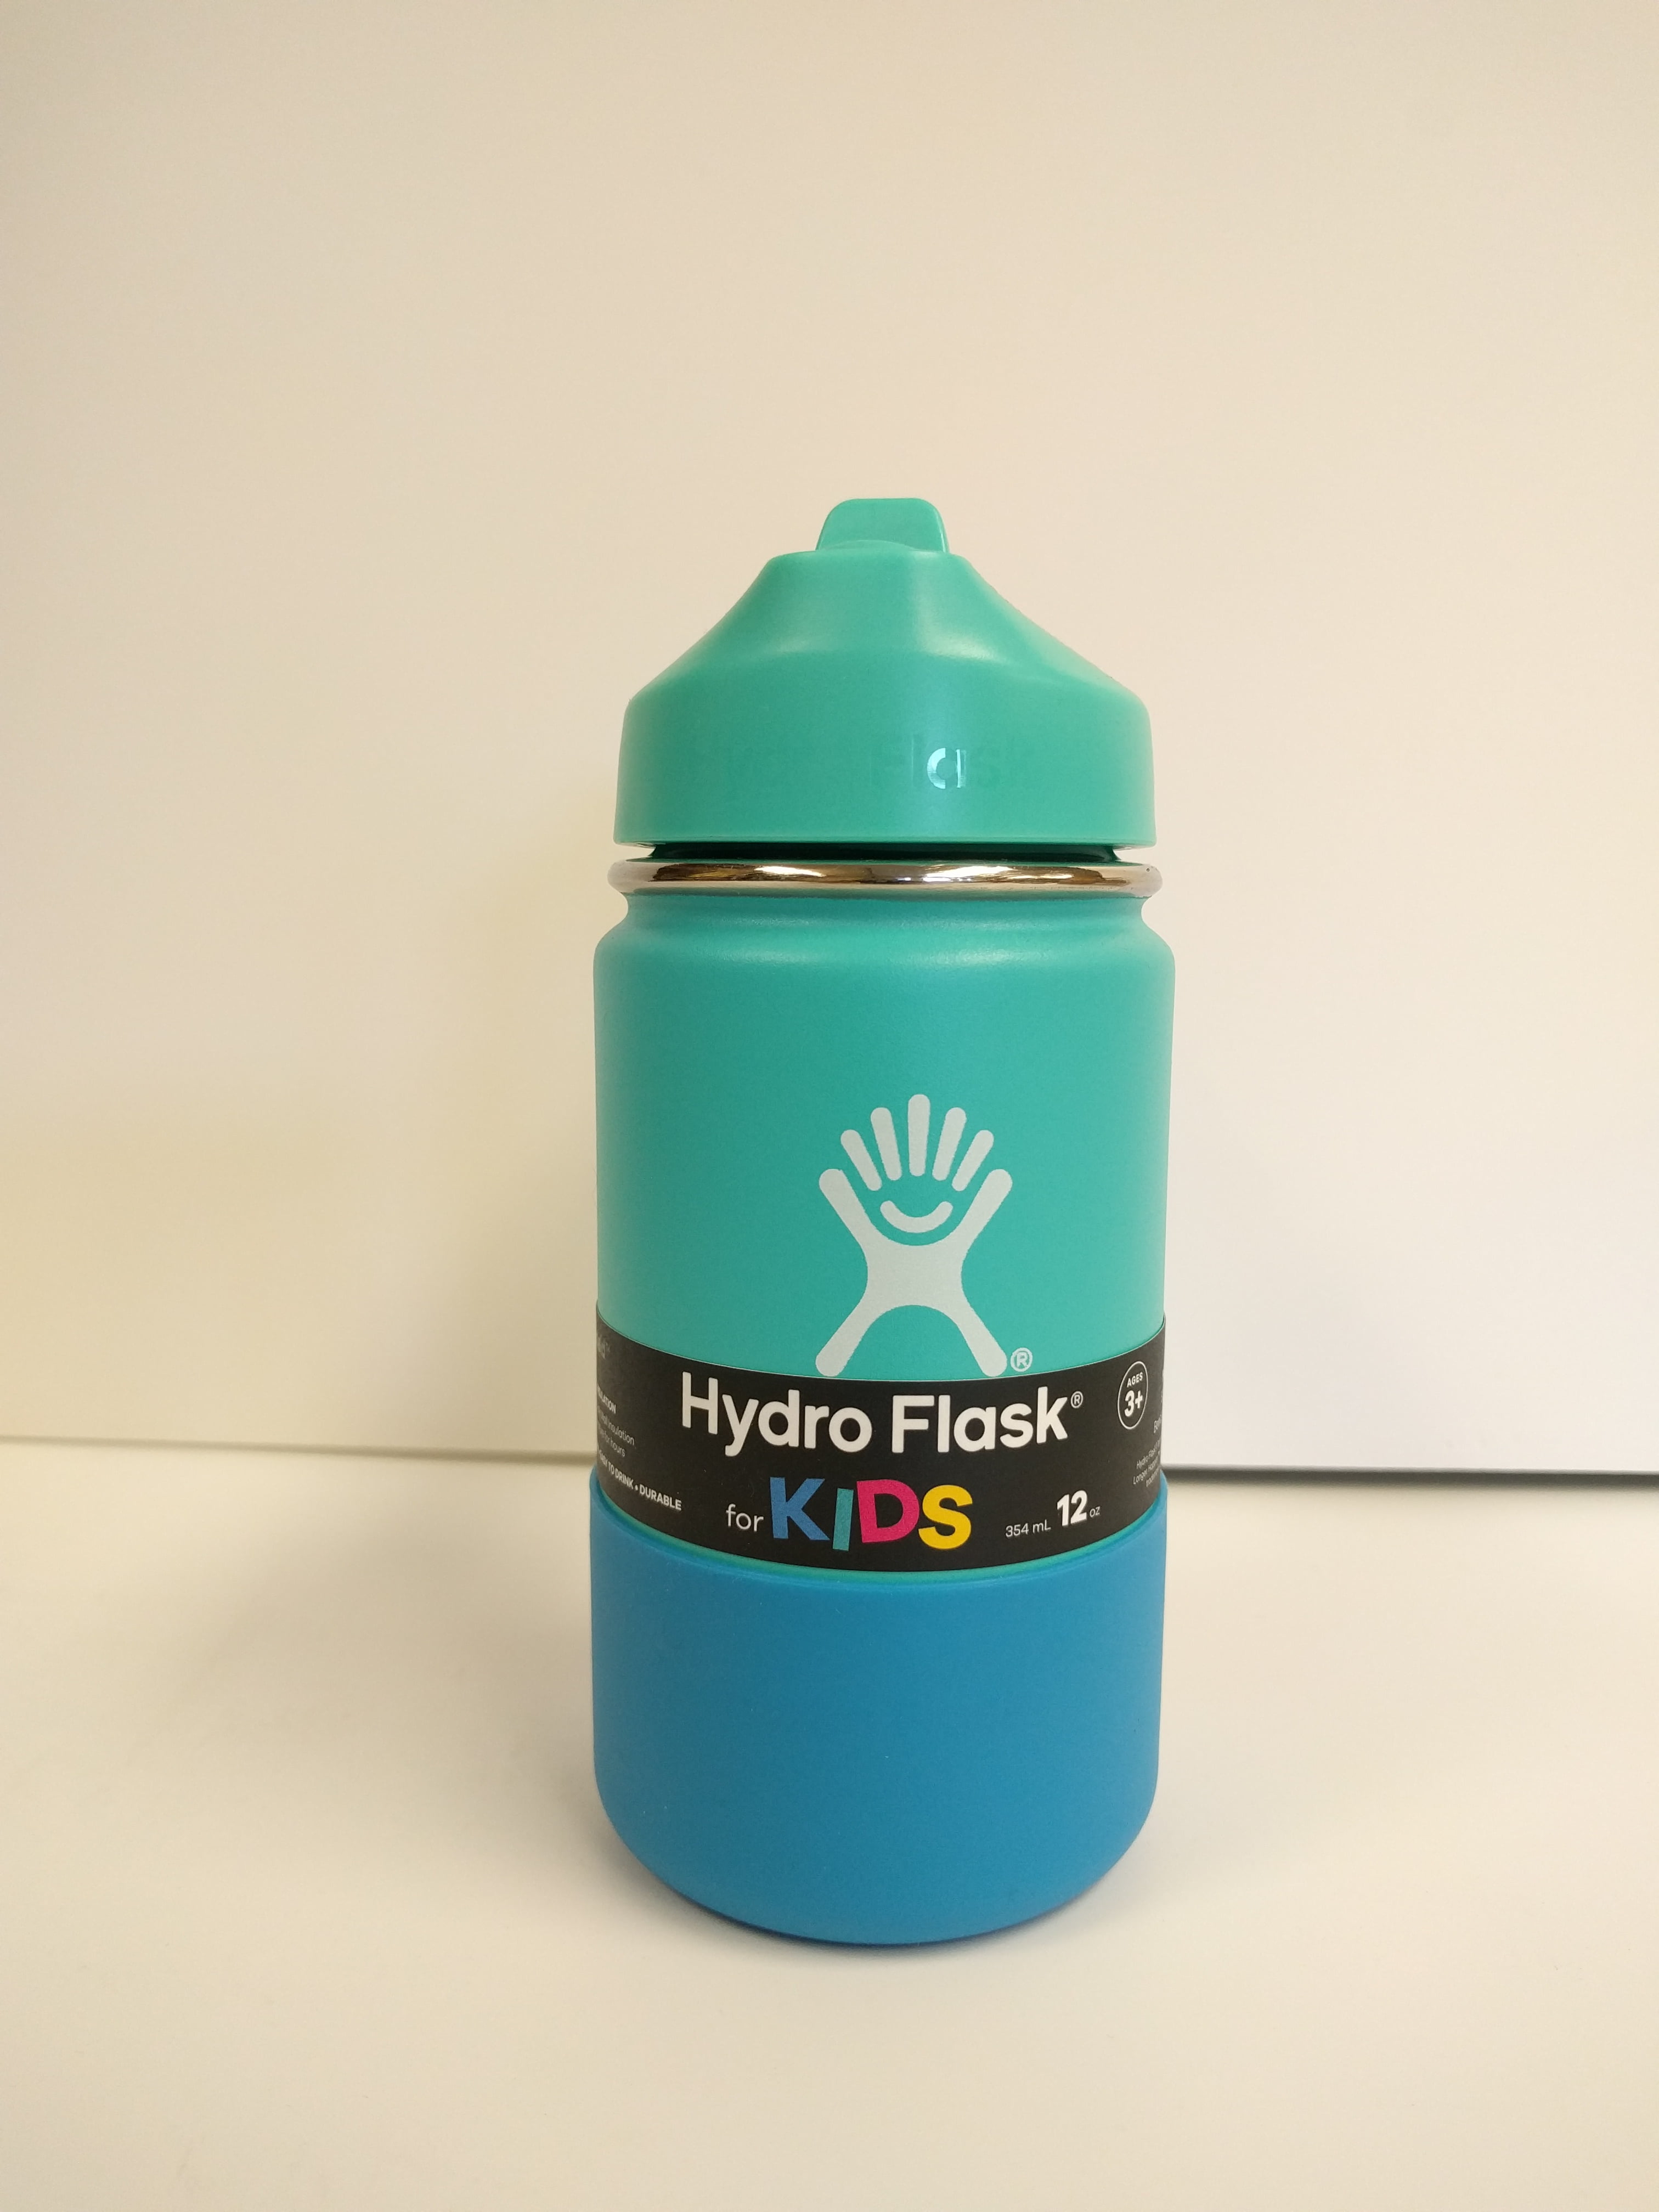 hydro flask made